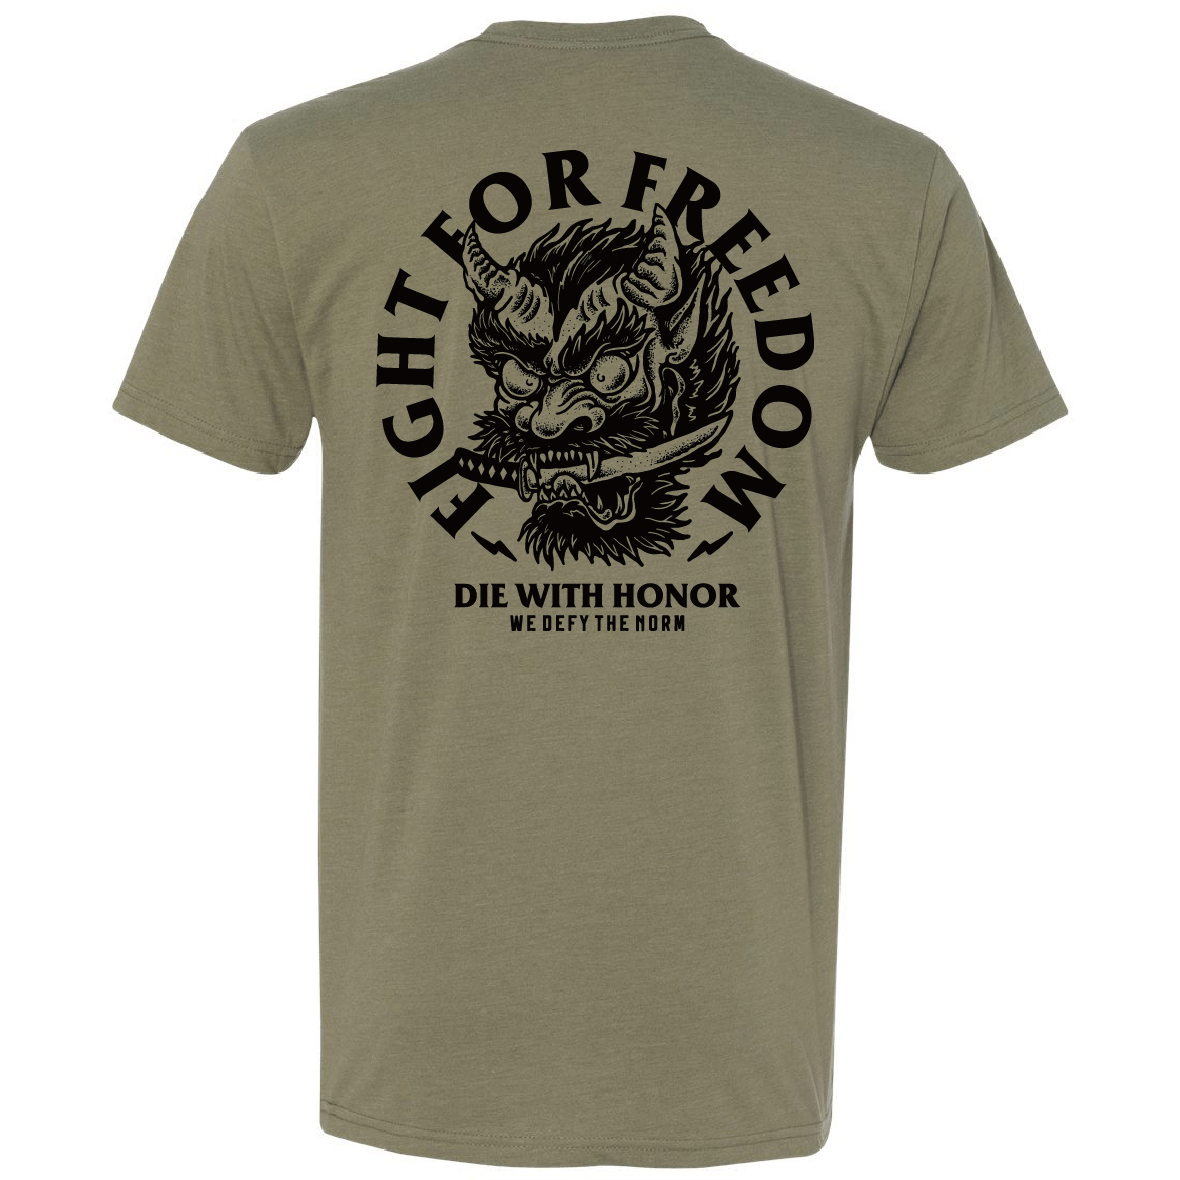 We Defy The Norm Men's Shirt S Fight For Freedom | Men's T-Shirt- COMING SOON!